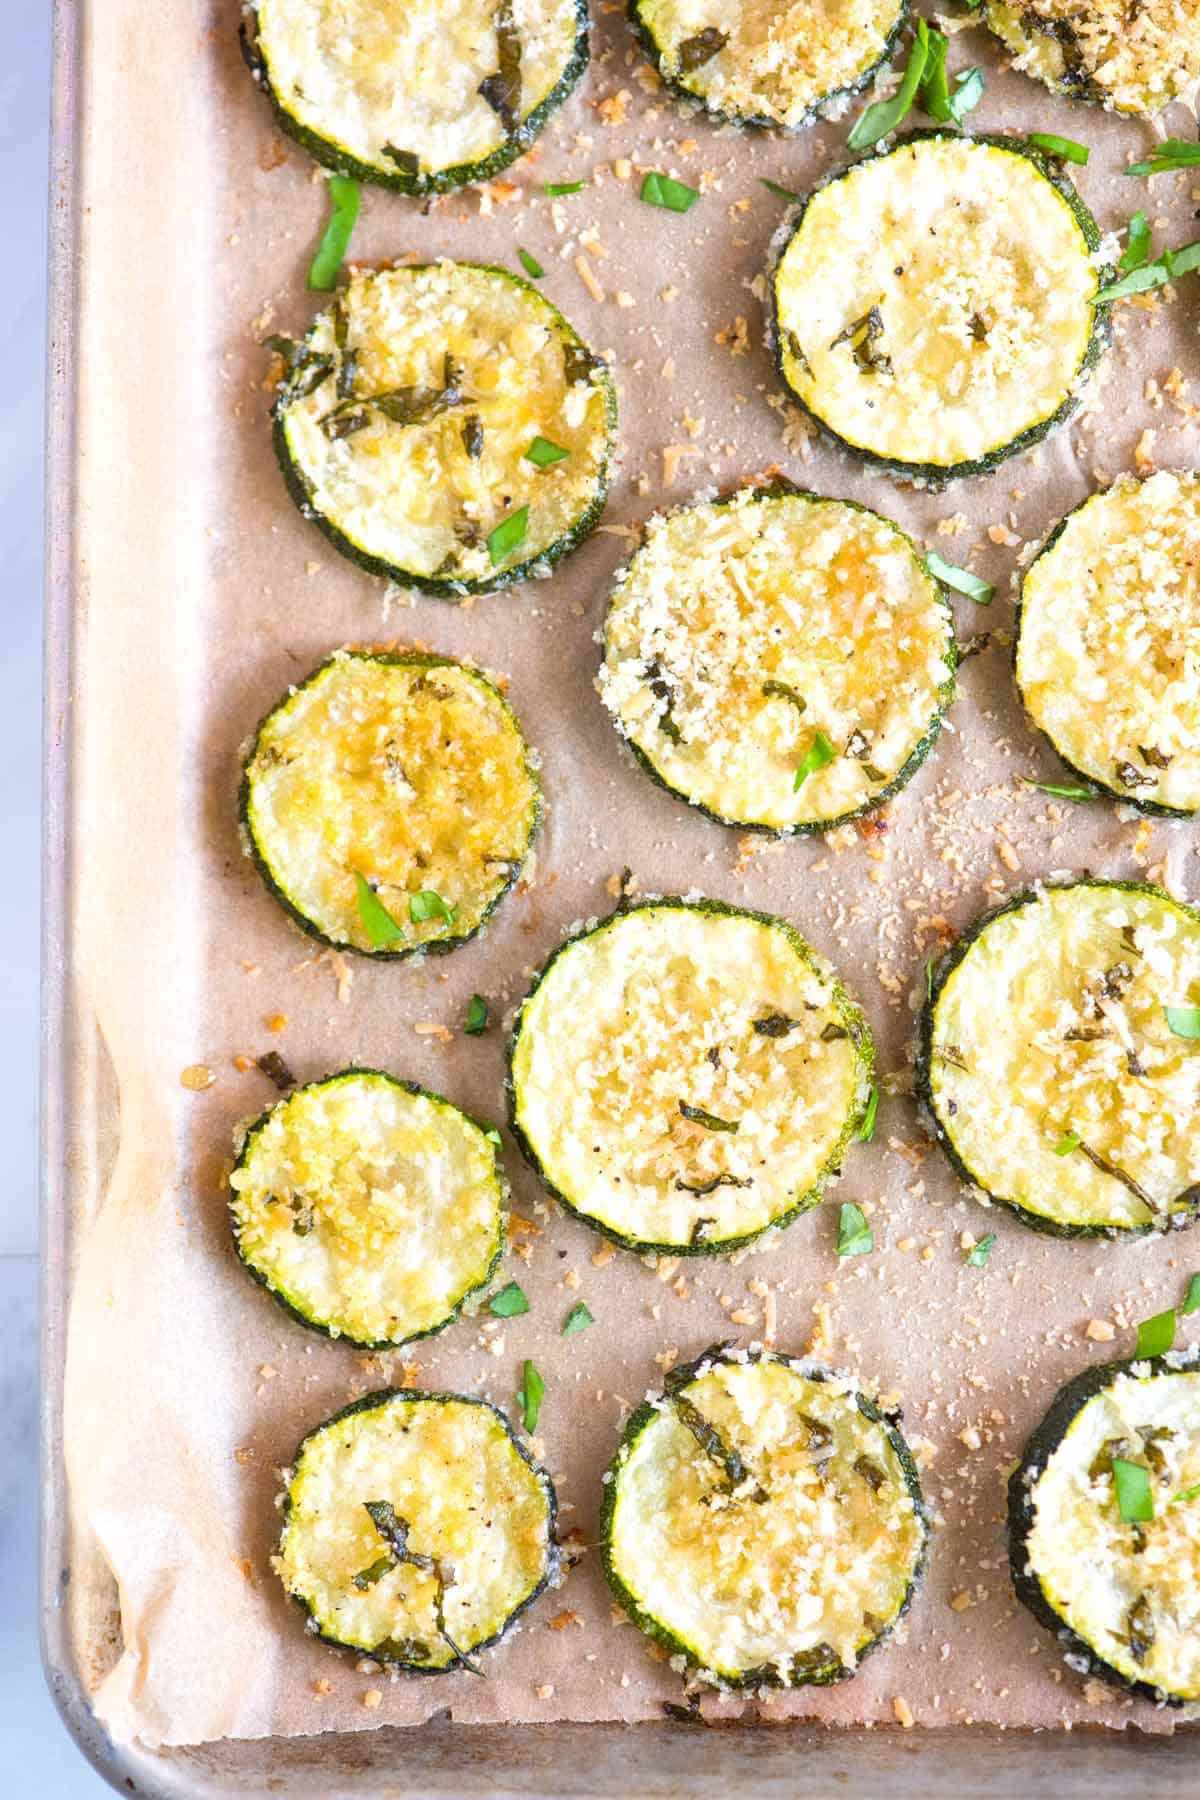 How to Make Healthy Zucchini Chips in the Oven